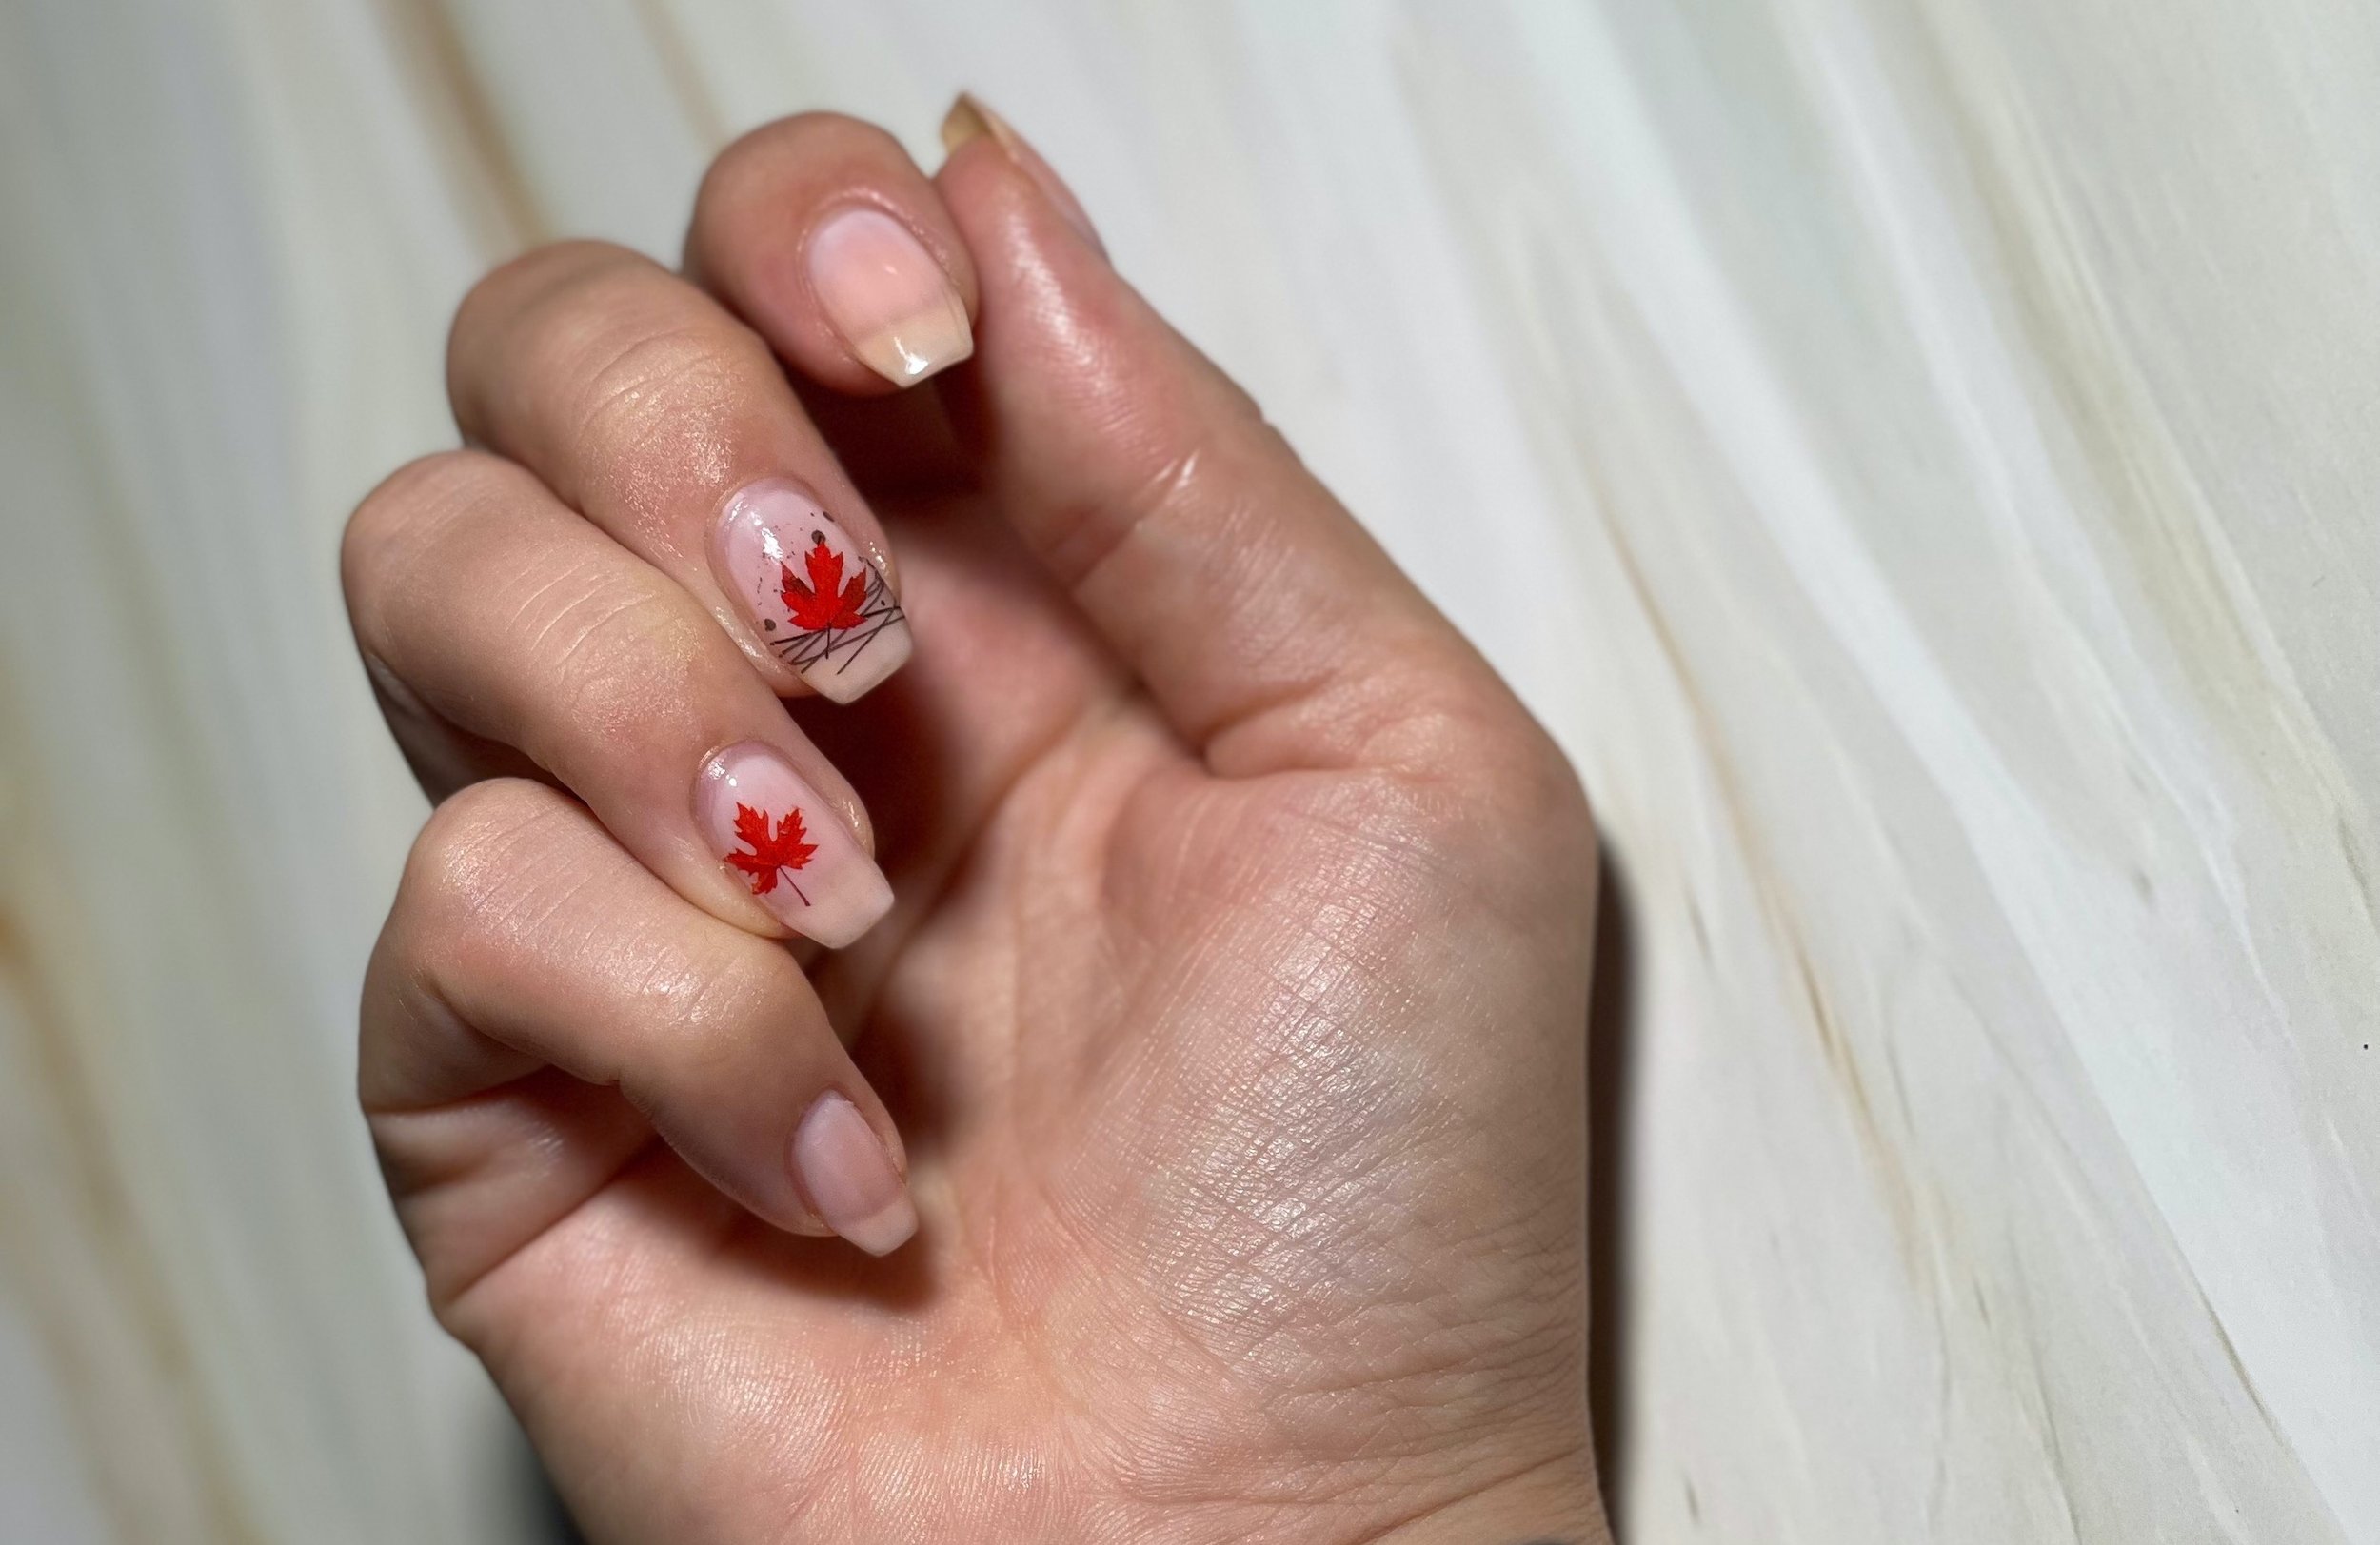 3. "Fall Leaves Nail Design for Thanksgiving" - wide 9